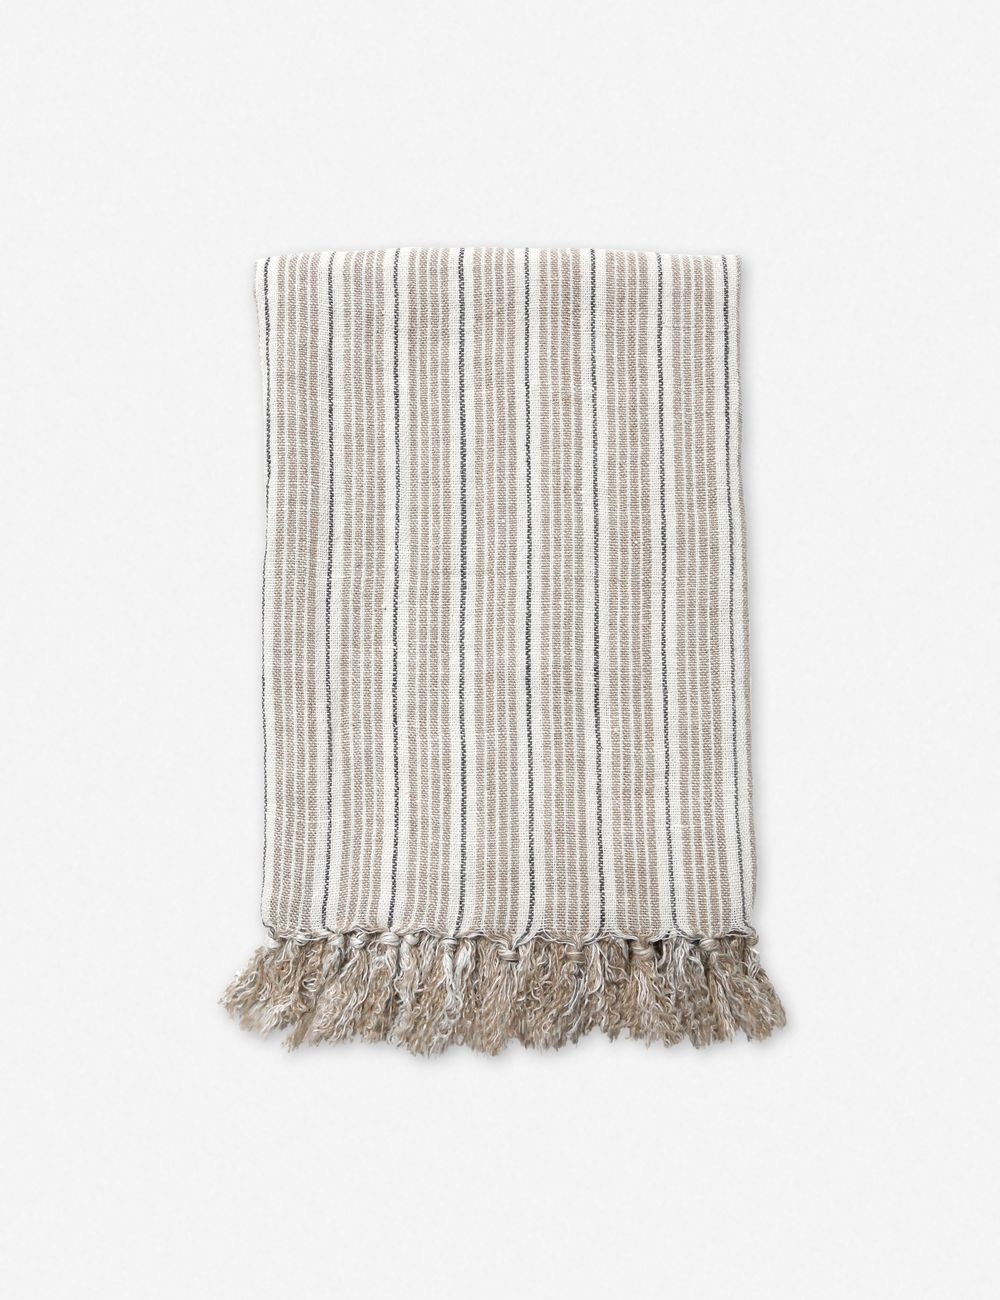 Newport Linen Throw by Pom Pom at Home - Image 0